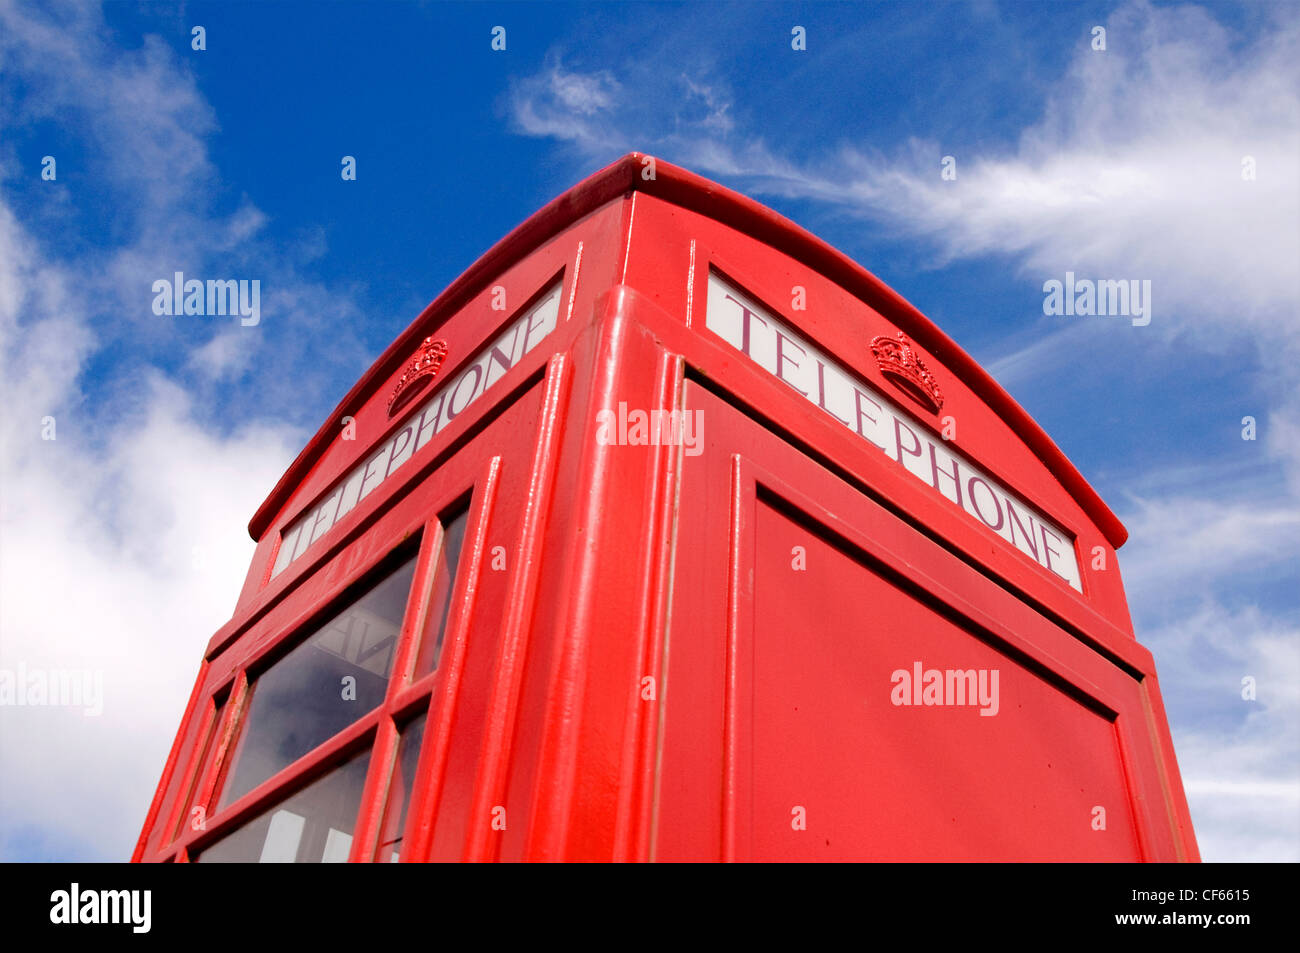 An iconic British telephone box contrasted against a blue sky. Stock Photo